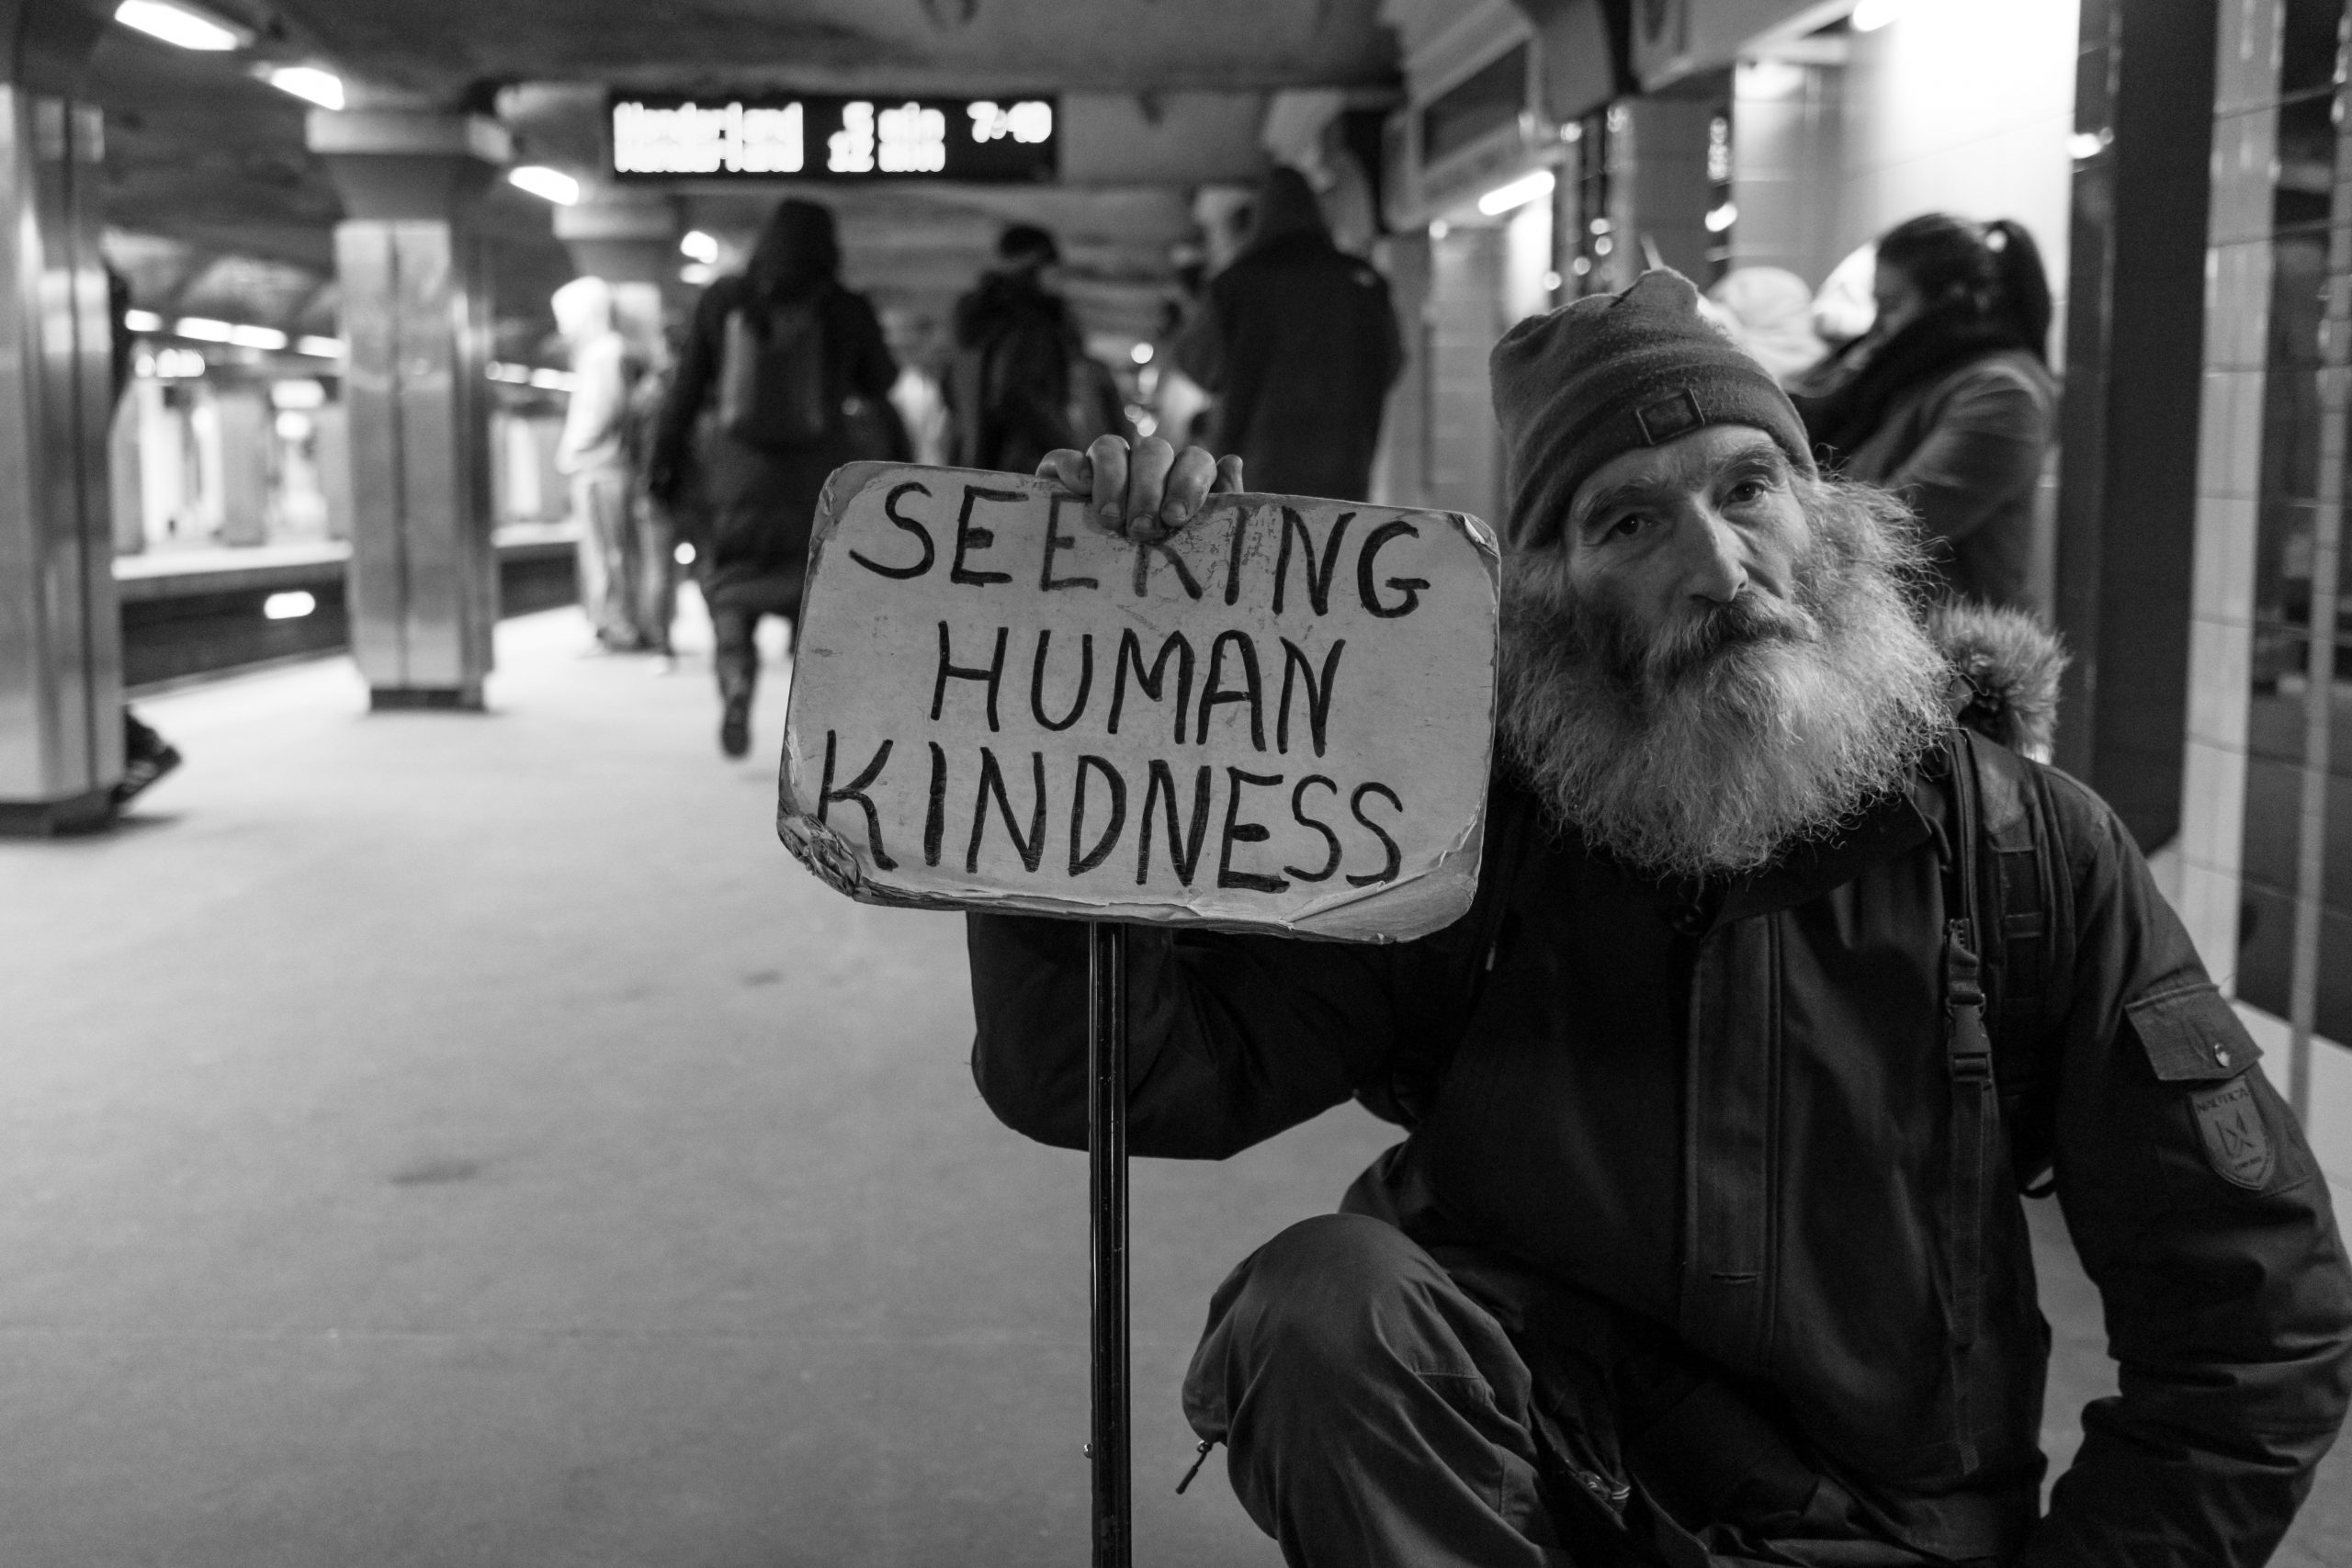 Elderly bearded man holding a sign, "seeking human kindness", in a subway station.